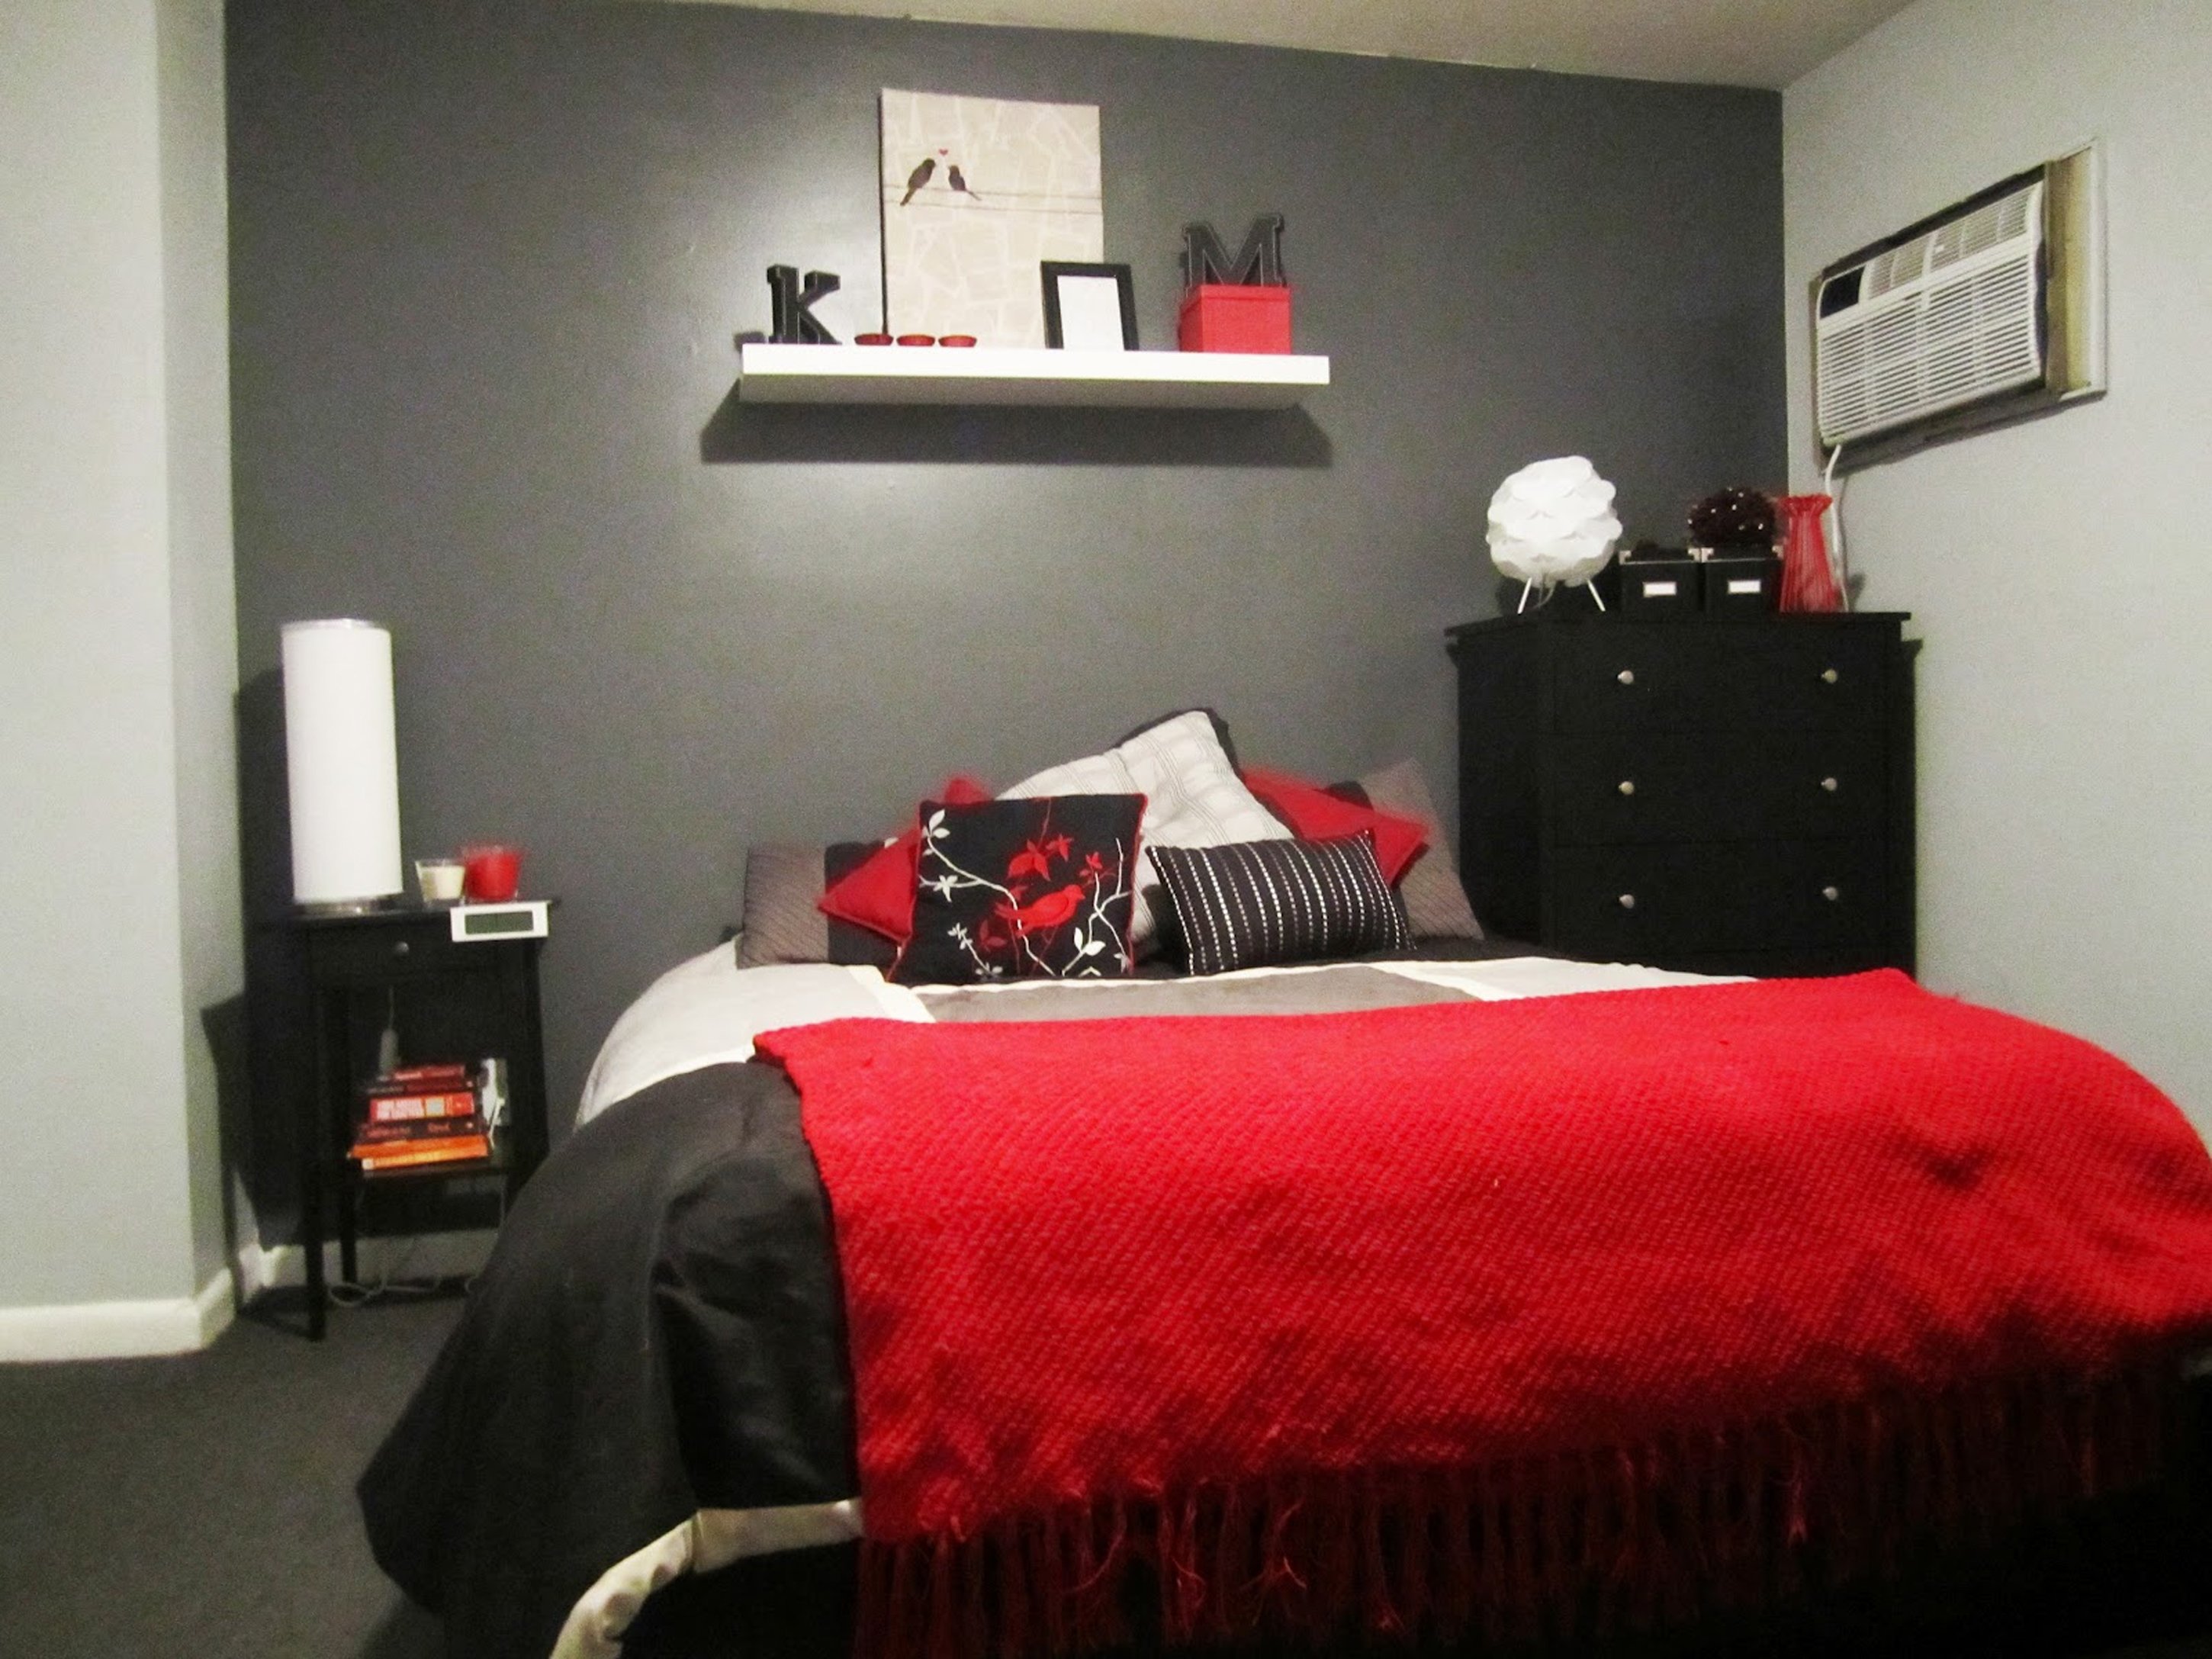 10 Cute Red Black And White Room Ideas bedroom extraordinary contemporary black and white bedrooms decors 2022